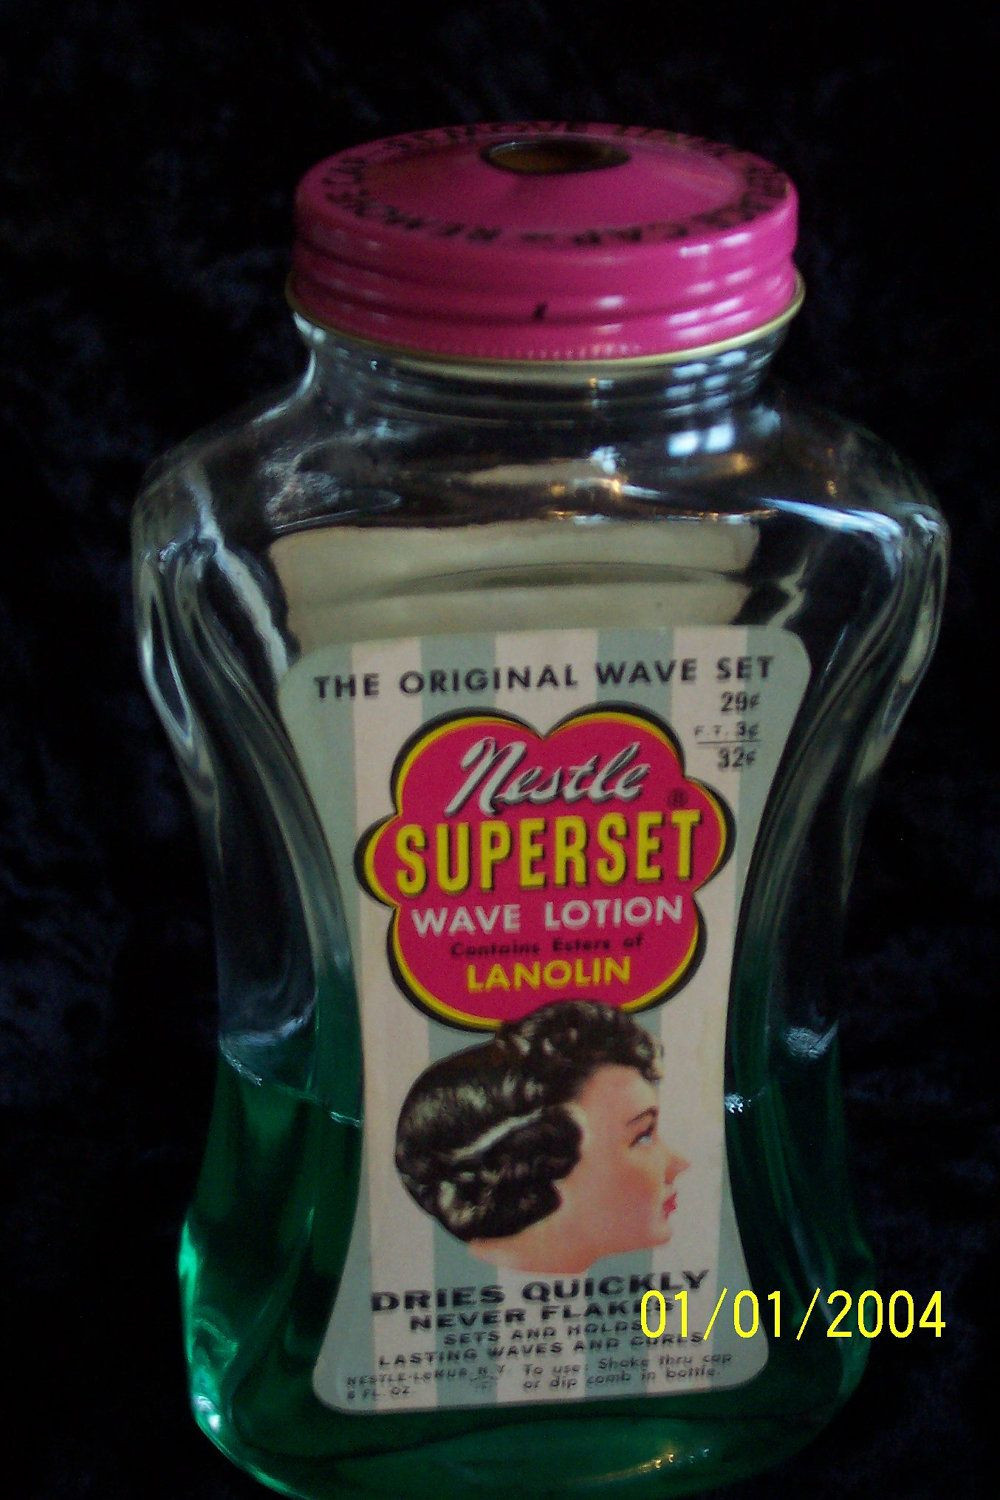 Nestle Baby Hair Lotion
 The Original Wave Set By Nestle 60 s Hair Setting Lotion